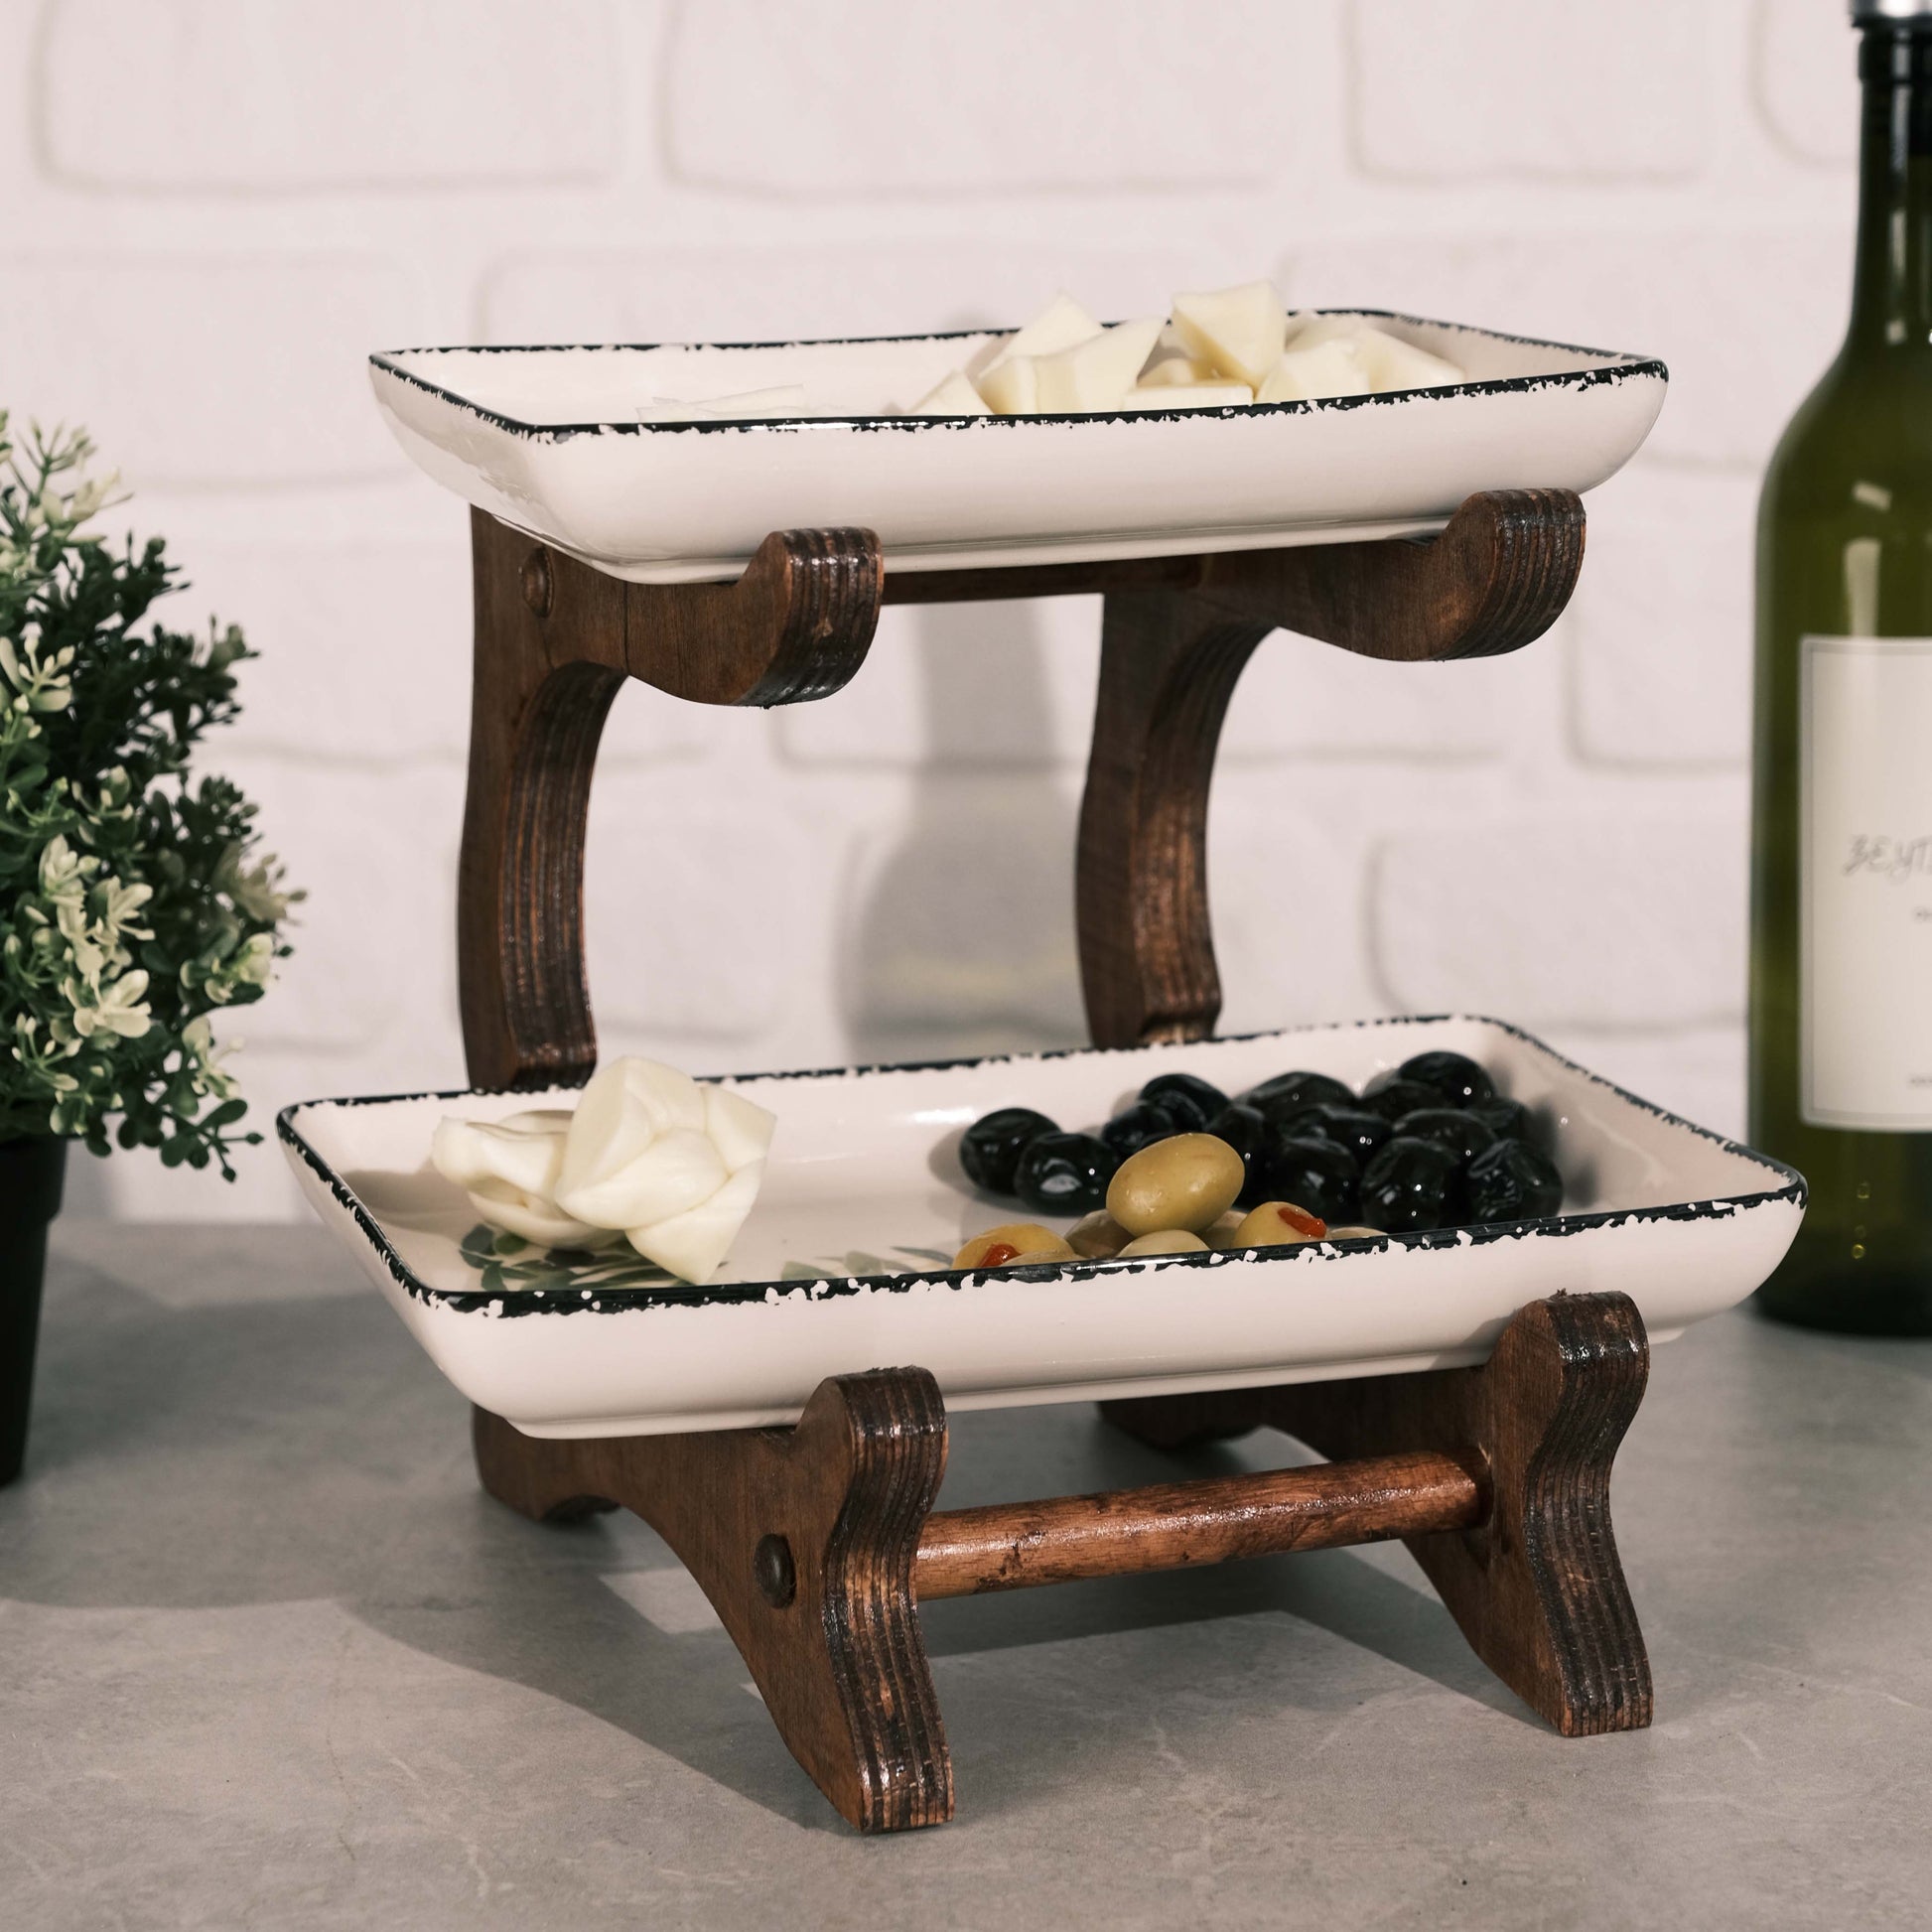 Ceramic Bowl Set with Wooden Rack - 2-3 Tiers Resin Wood Living